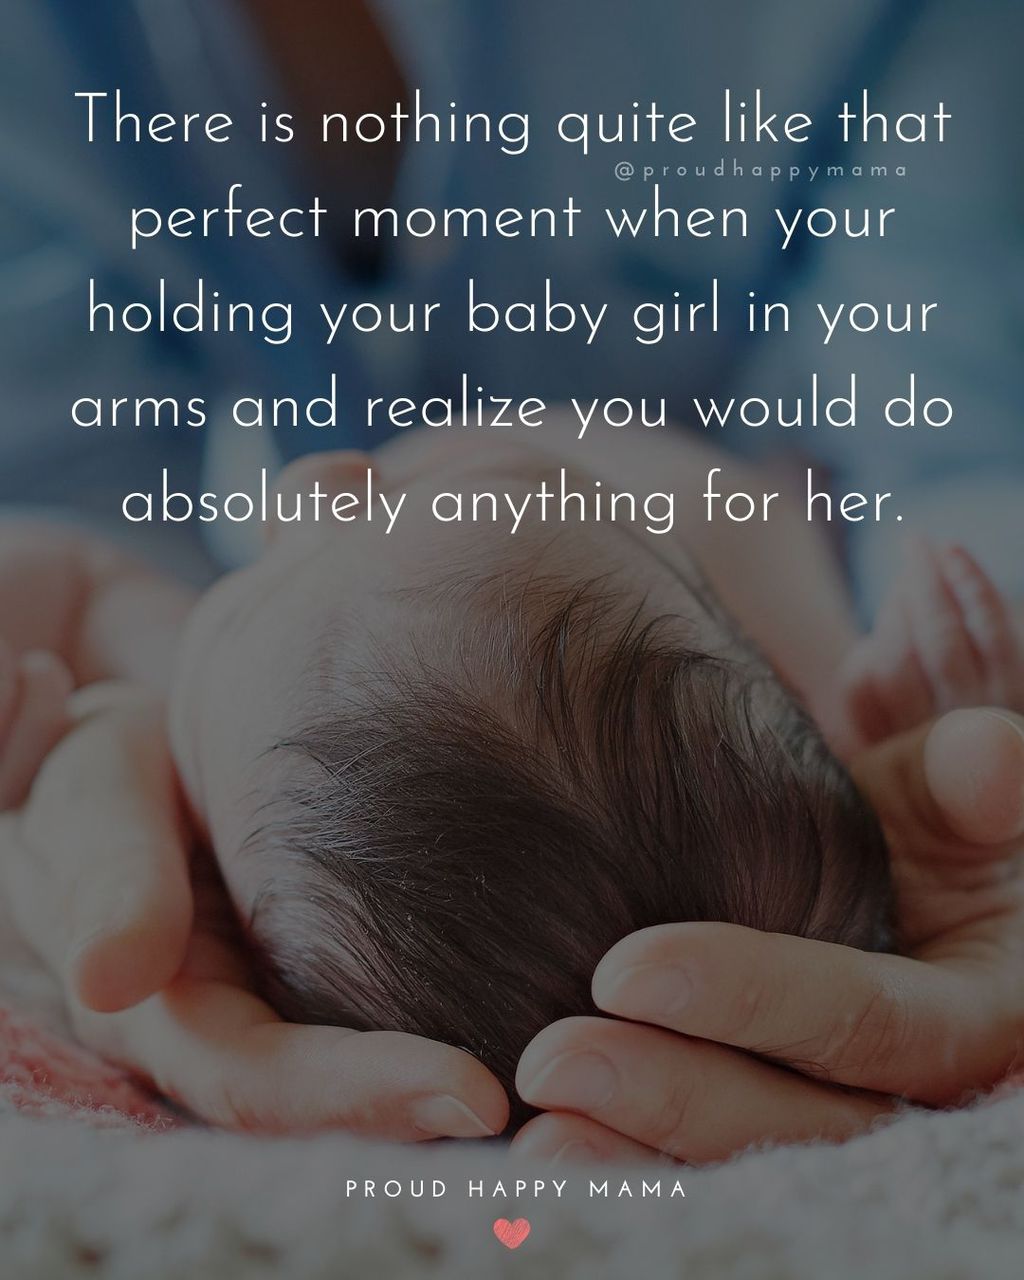 Baby Girl Quotes - There is nothing quite like that perfect moment when your holding your baby girl in your arms and realize you would do absolutely anything for her.